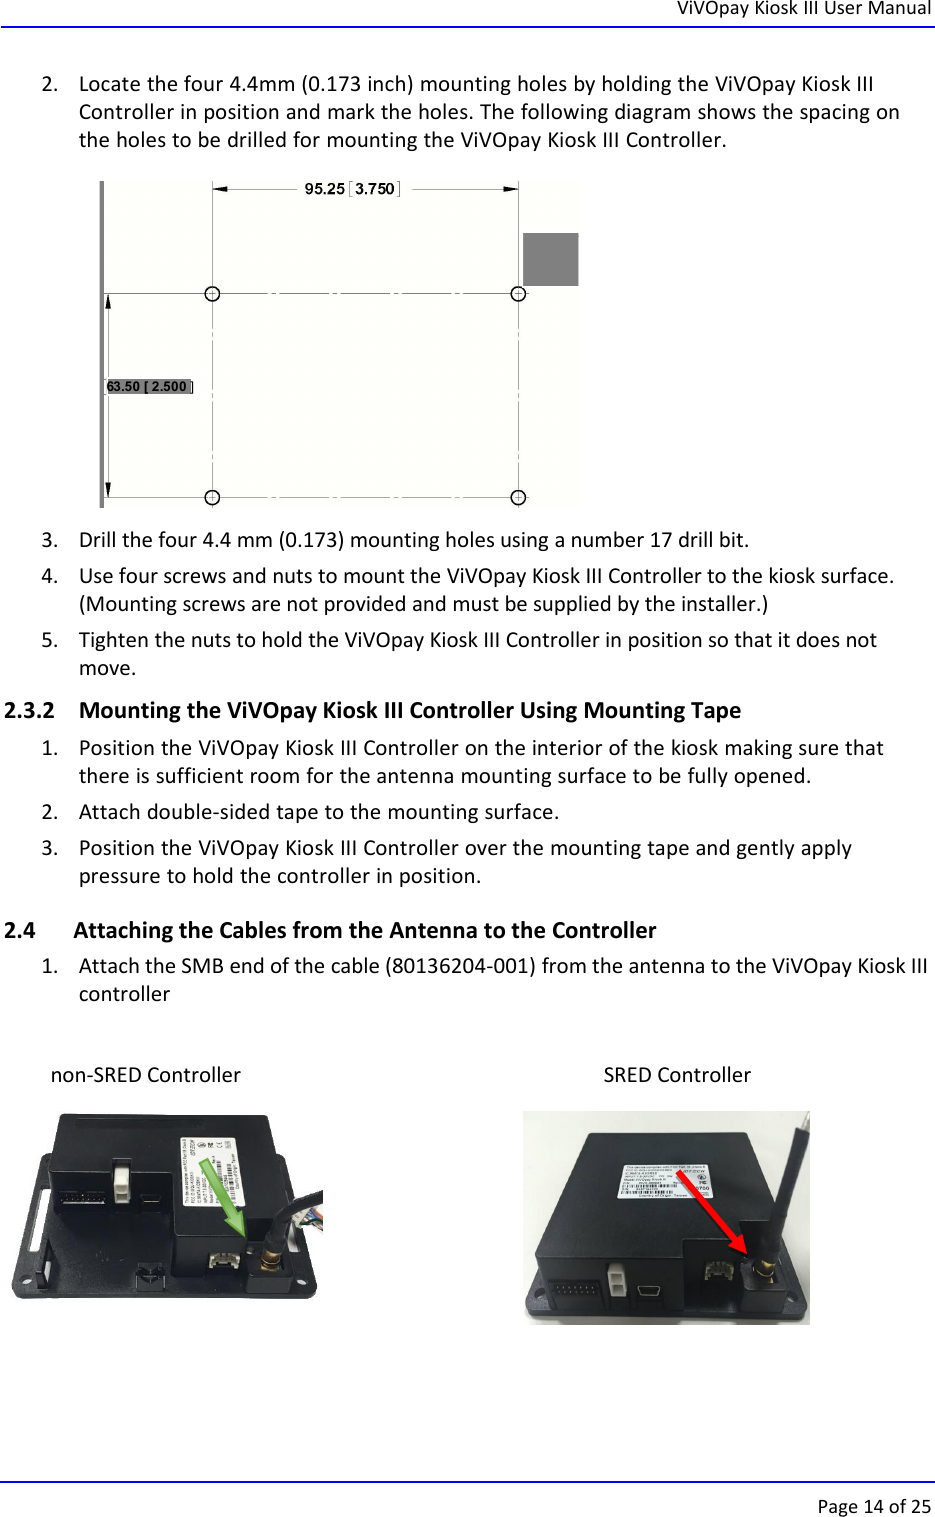 ViVOpay Kiosk III User ManualPage 14 of 2563.50 [ 2.500 ]2. Locate the four 4.4mm (0.173 inch) mounting holes by holding the ViVOpay Kiosk IIIController in position and mark the holes. The following diagram shows the spacing onthe holes to be drilled for mounting the ViVOpay Kiosk III Controller.3. Drill the four 4.4 mm (0.173) mounting holes using a number 17 drill bit.4. Use four screws and nuts to mount the ViVOpay Kiosk III Controller to the kiosk surface.(Mounting screws are not provided and must be supplied by the installer.)5. Tighten the nuts to hold the ViVOpay Kiosk III Controller in position so that it does notmove.2.3.2 Mounting the ViVOpay Kiosk III Controller Using Mounting Tape1. Position the ViVOpay Kiosk III Controller on the interior of the kiosk making sure thatthere is sufficient room for the antenna mounting surface to be fully opened.2. Attach double-sided tape to the mounting surface.3. Position the ViVOpay Kiosk III Controller over the mounting tape and gently applypressure to hold the controller in position.2.4 Attaching the Cables from the Antenna to the Controller1. Attach the SMB end of the cable (80136204-001) from the antenna to the ViVOpay Kiosk IIIcontrollernon-SRED Controller SRED Controller